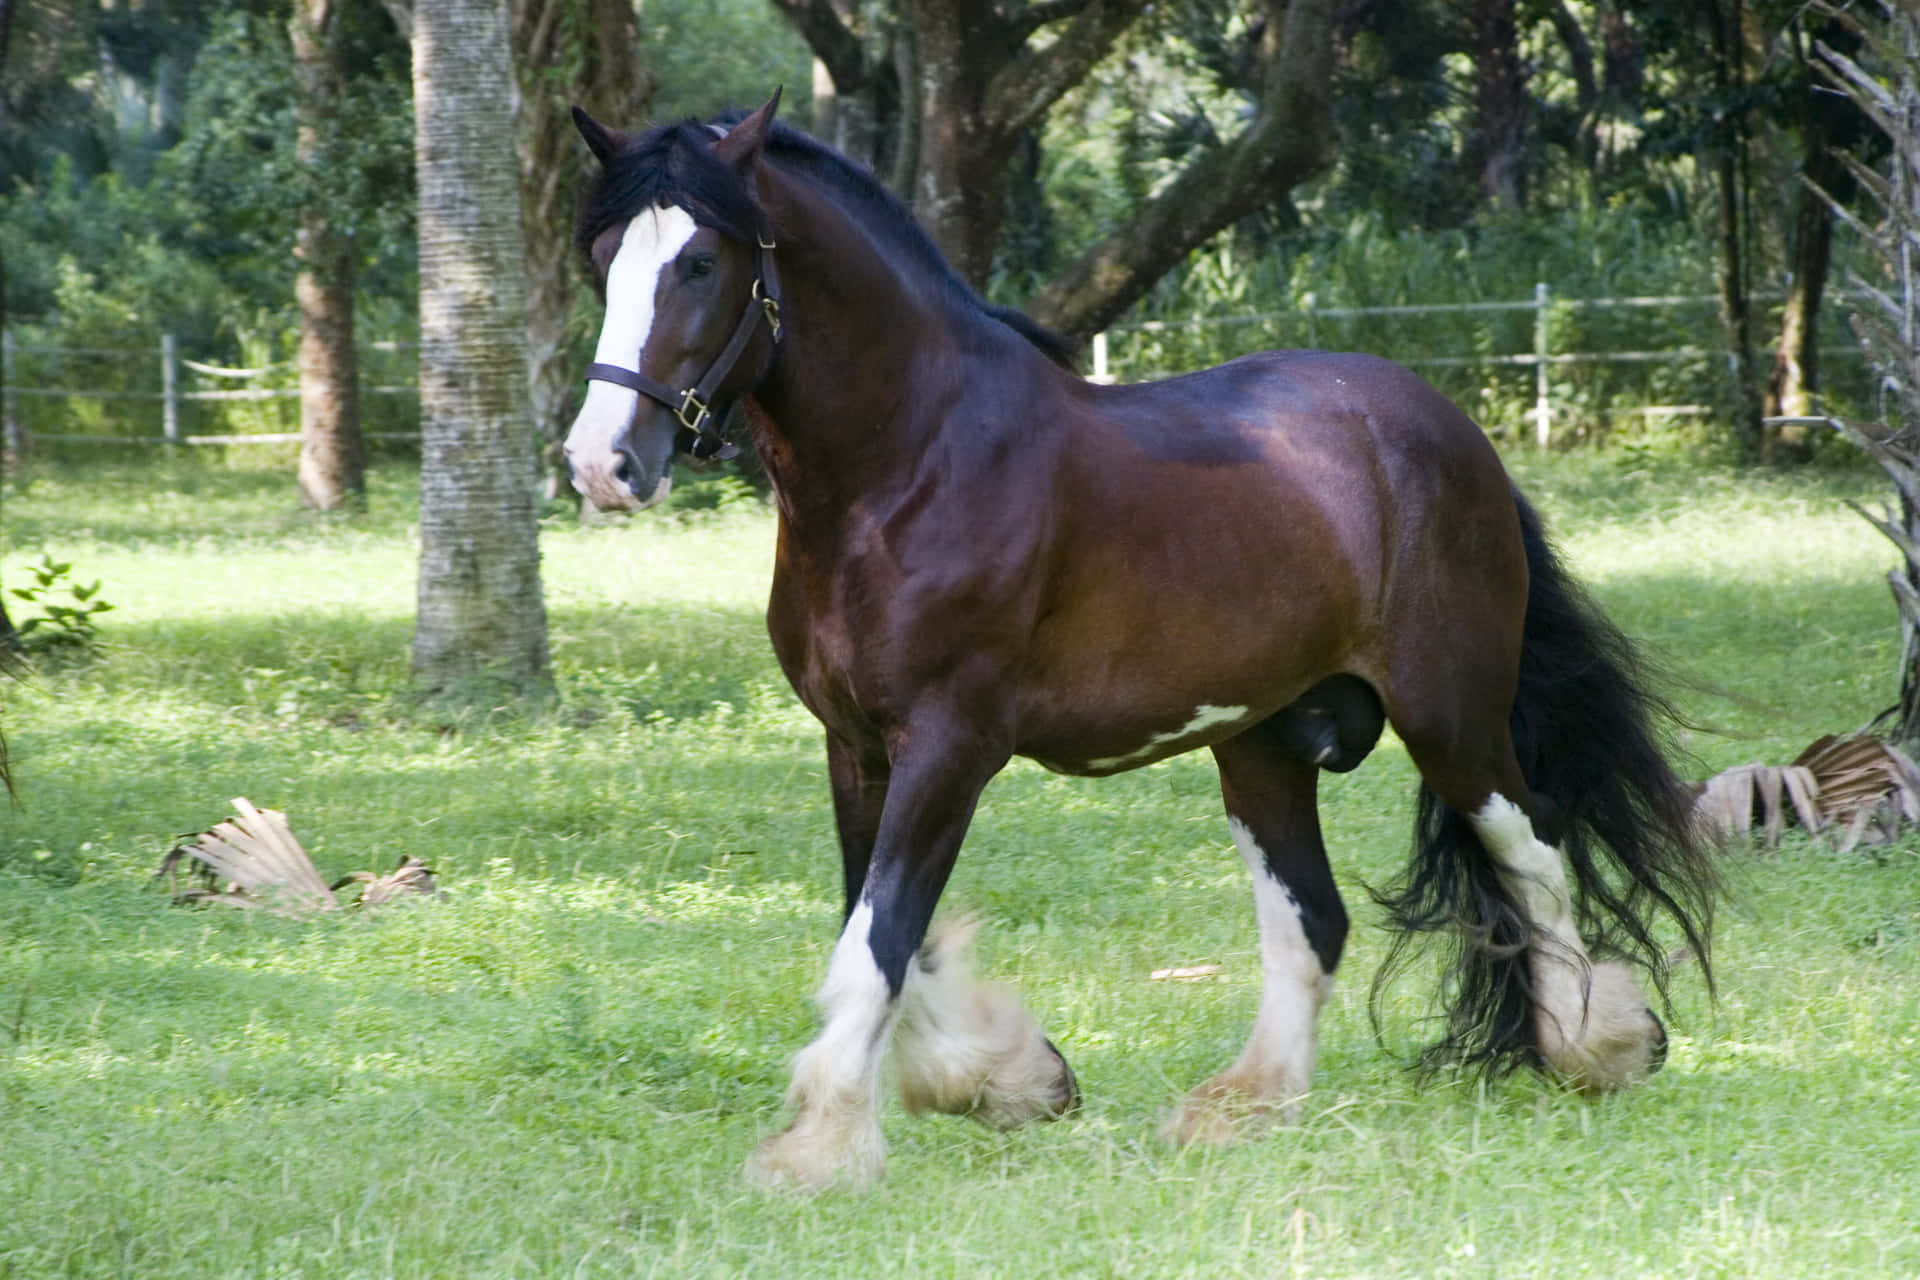 A majestic Clydesdale horse forges forward